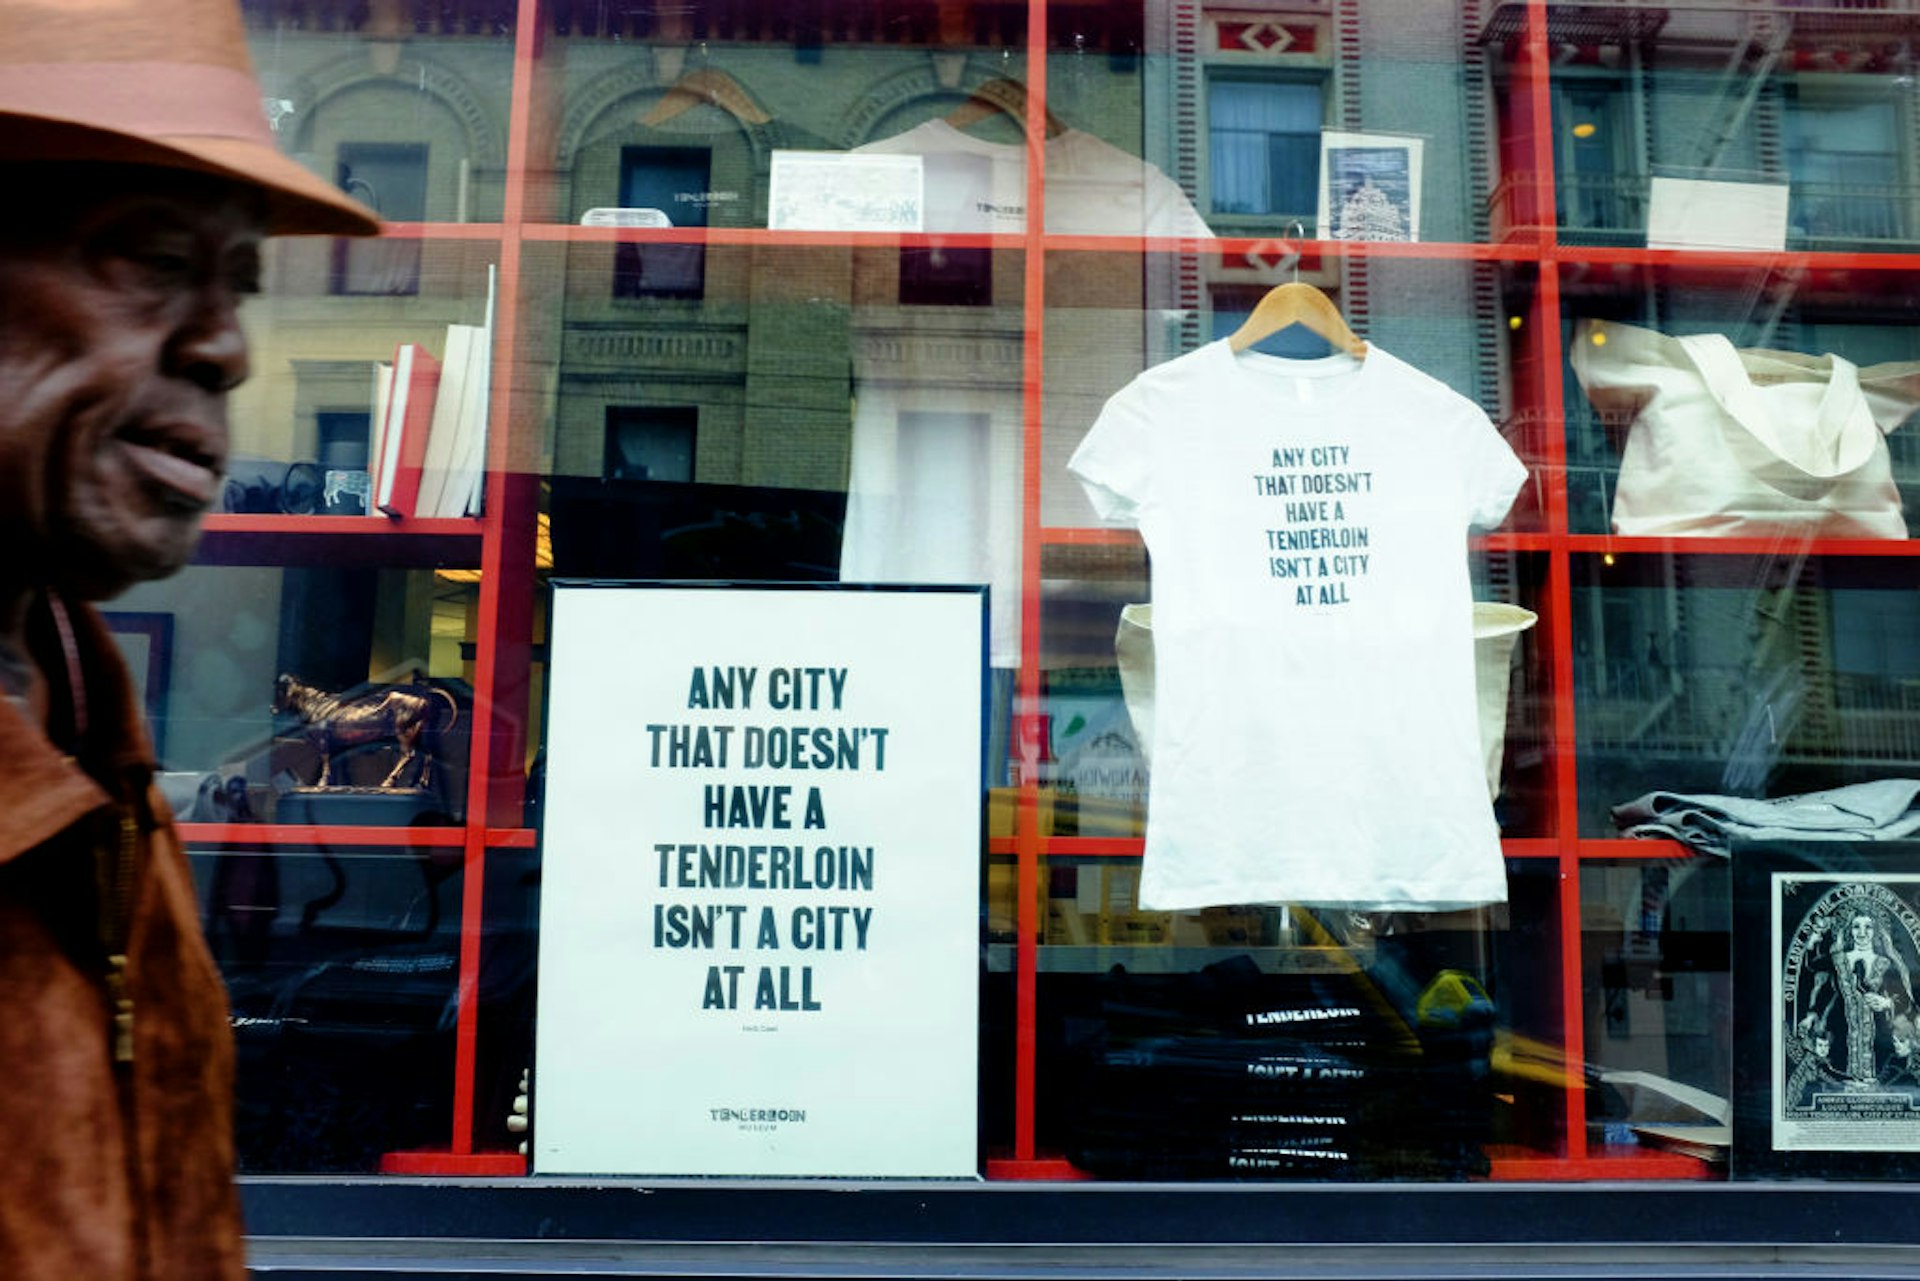 The Tenderloin Museum in San Francisco, California, with t-shirts and posters in the window